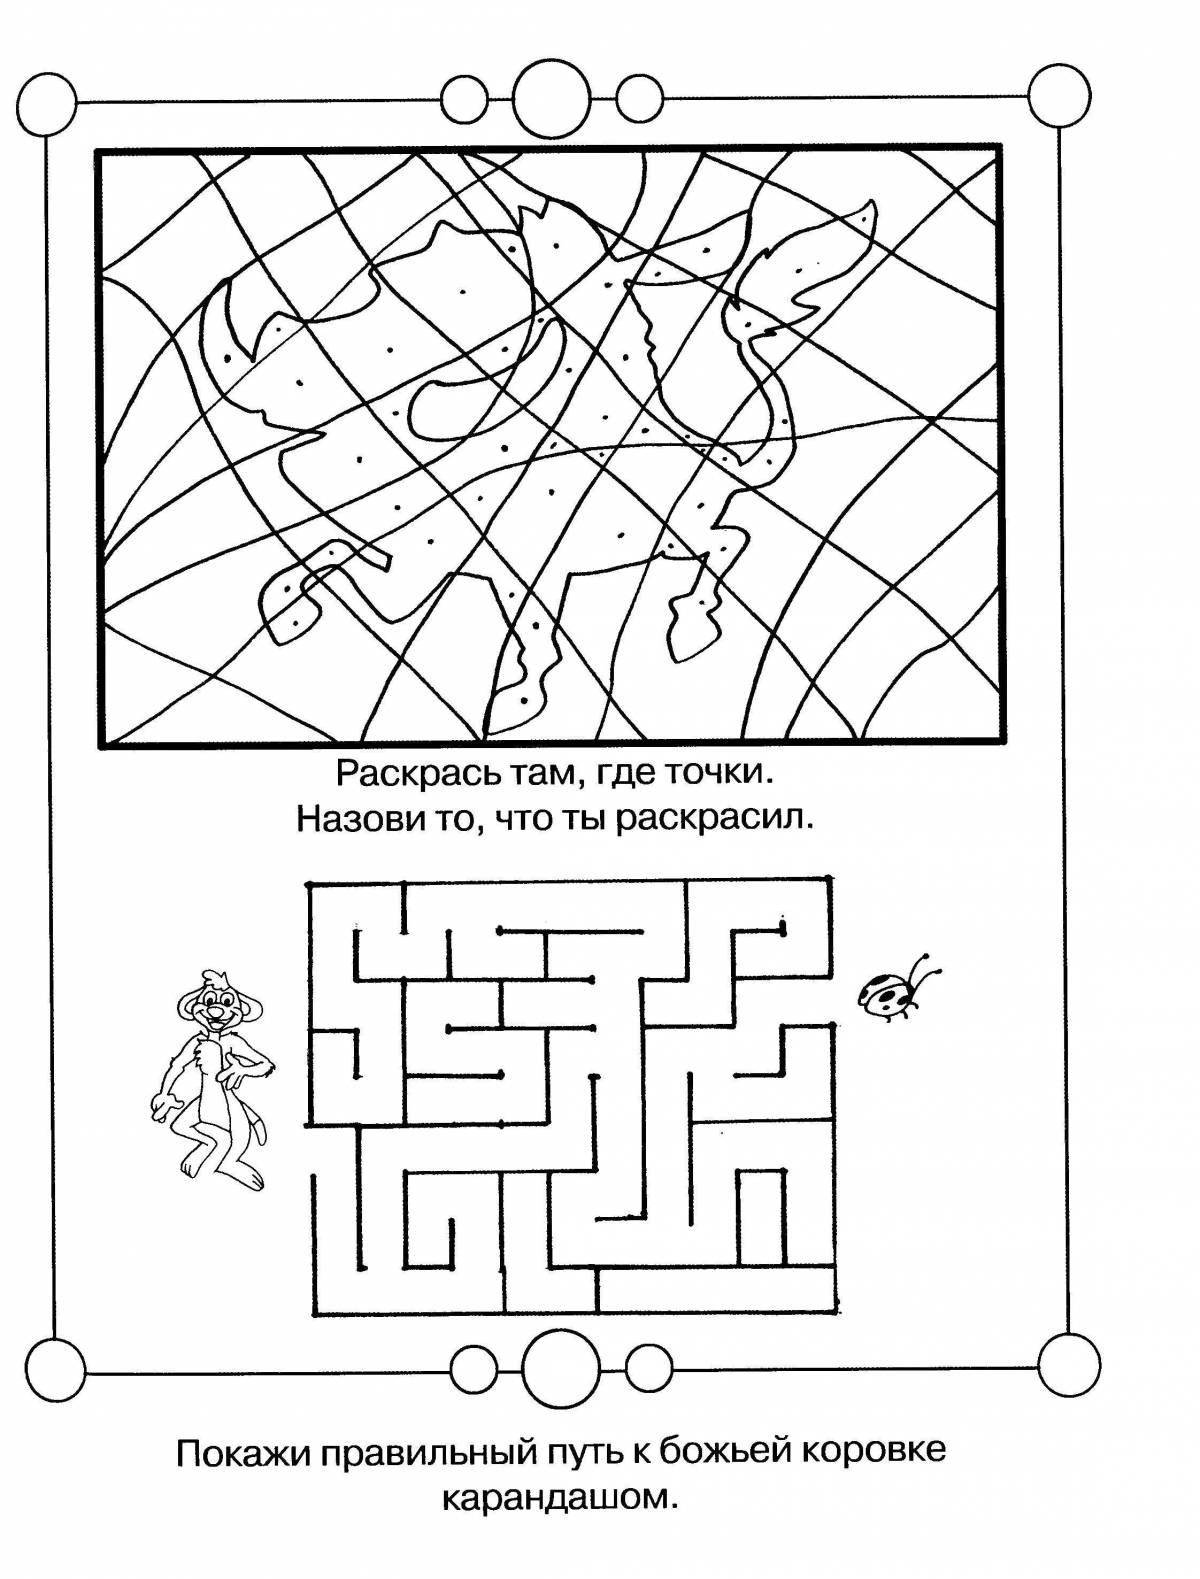 Fun coloring pages for 7-8 year olds